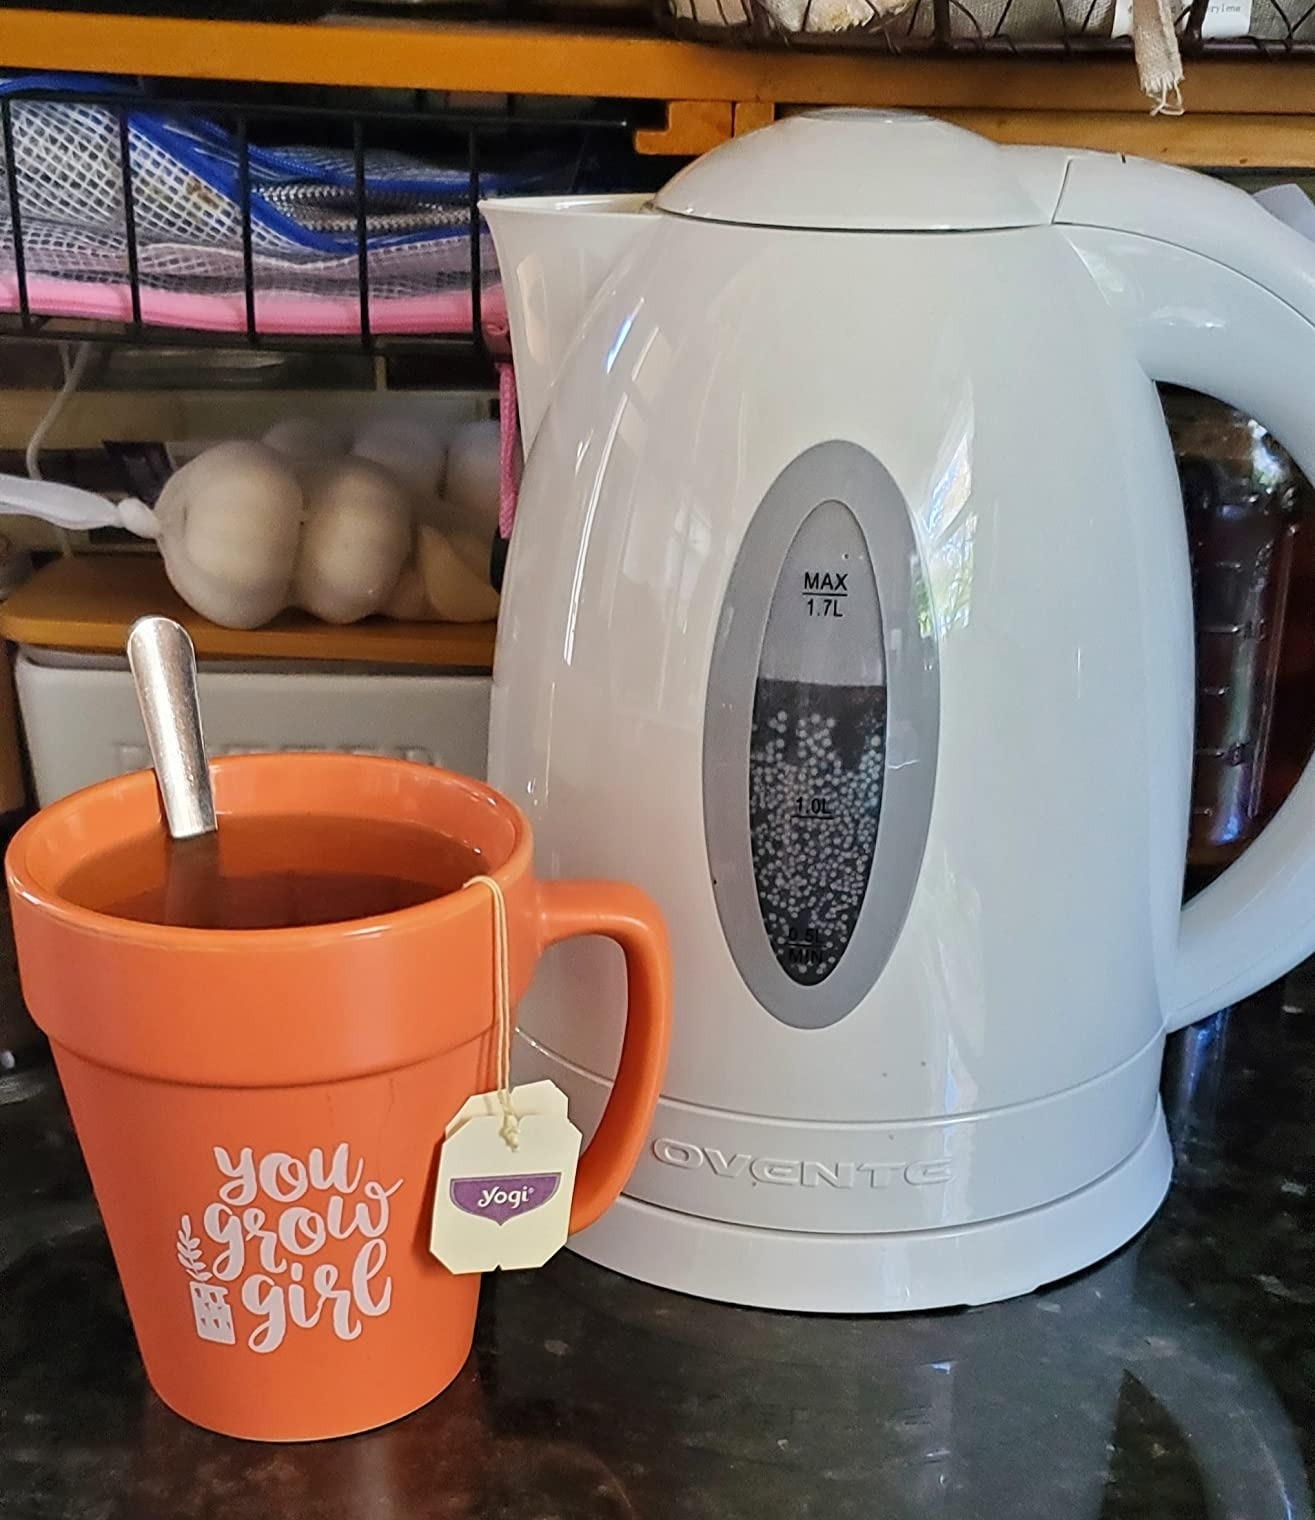 The kettle next to a mug